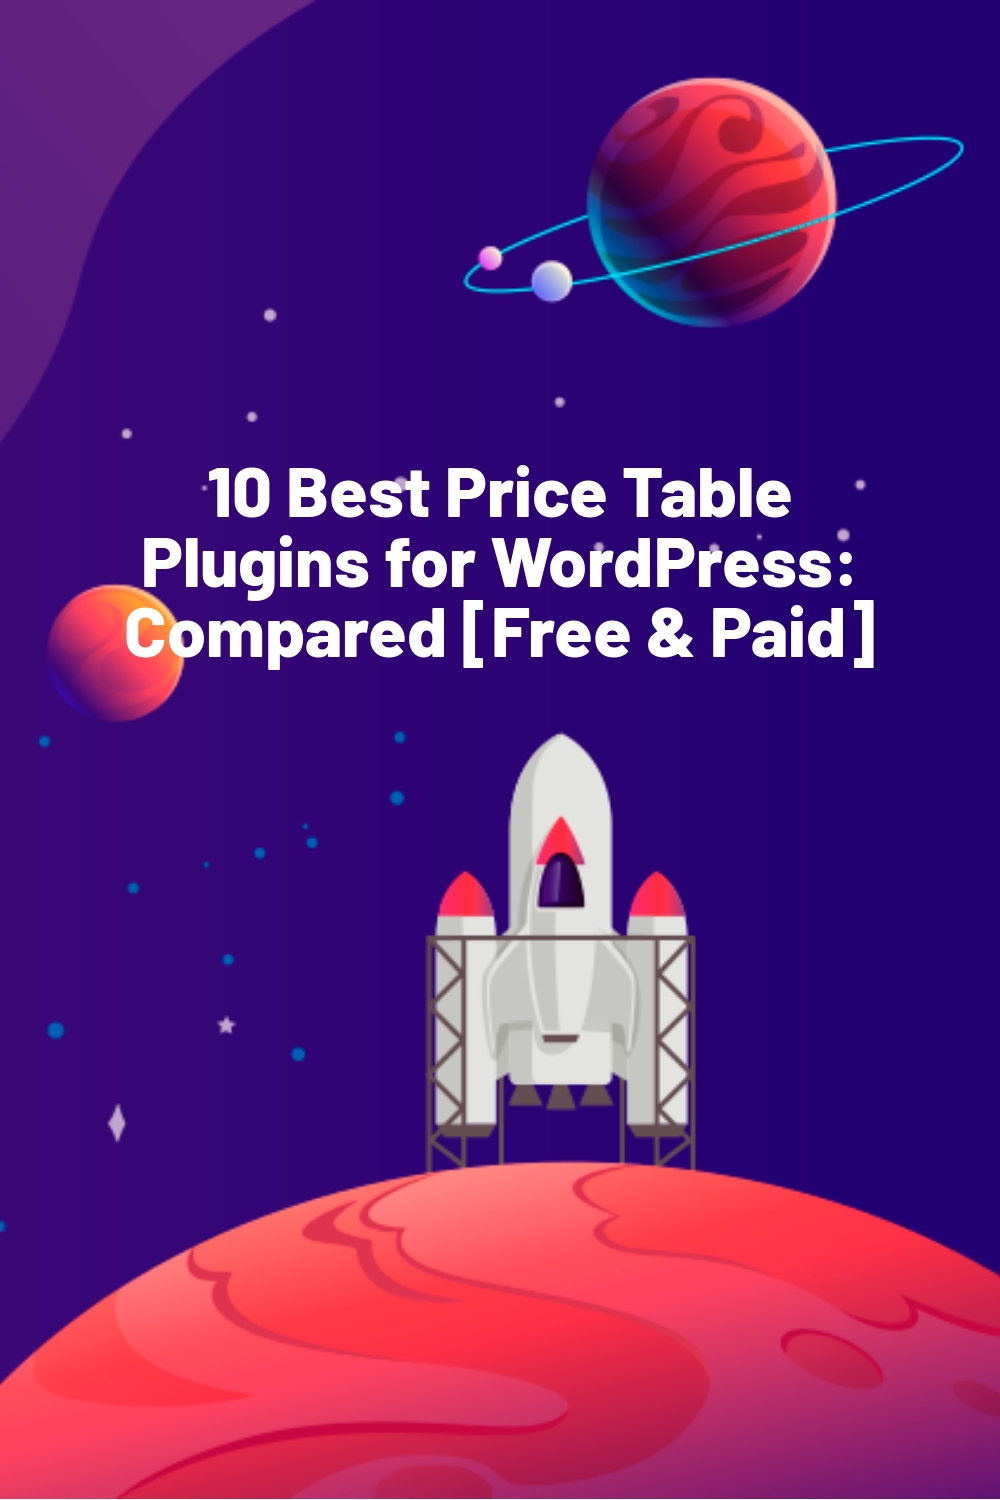 10 Best Price Table Plugins for WordPress: Compared [Free & Paid]